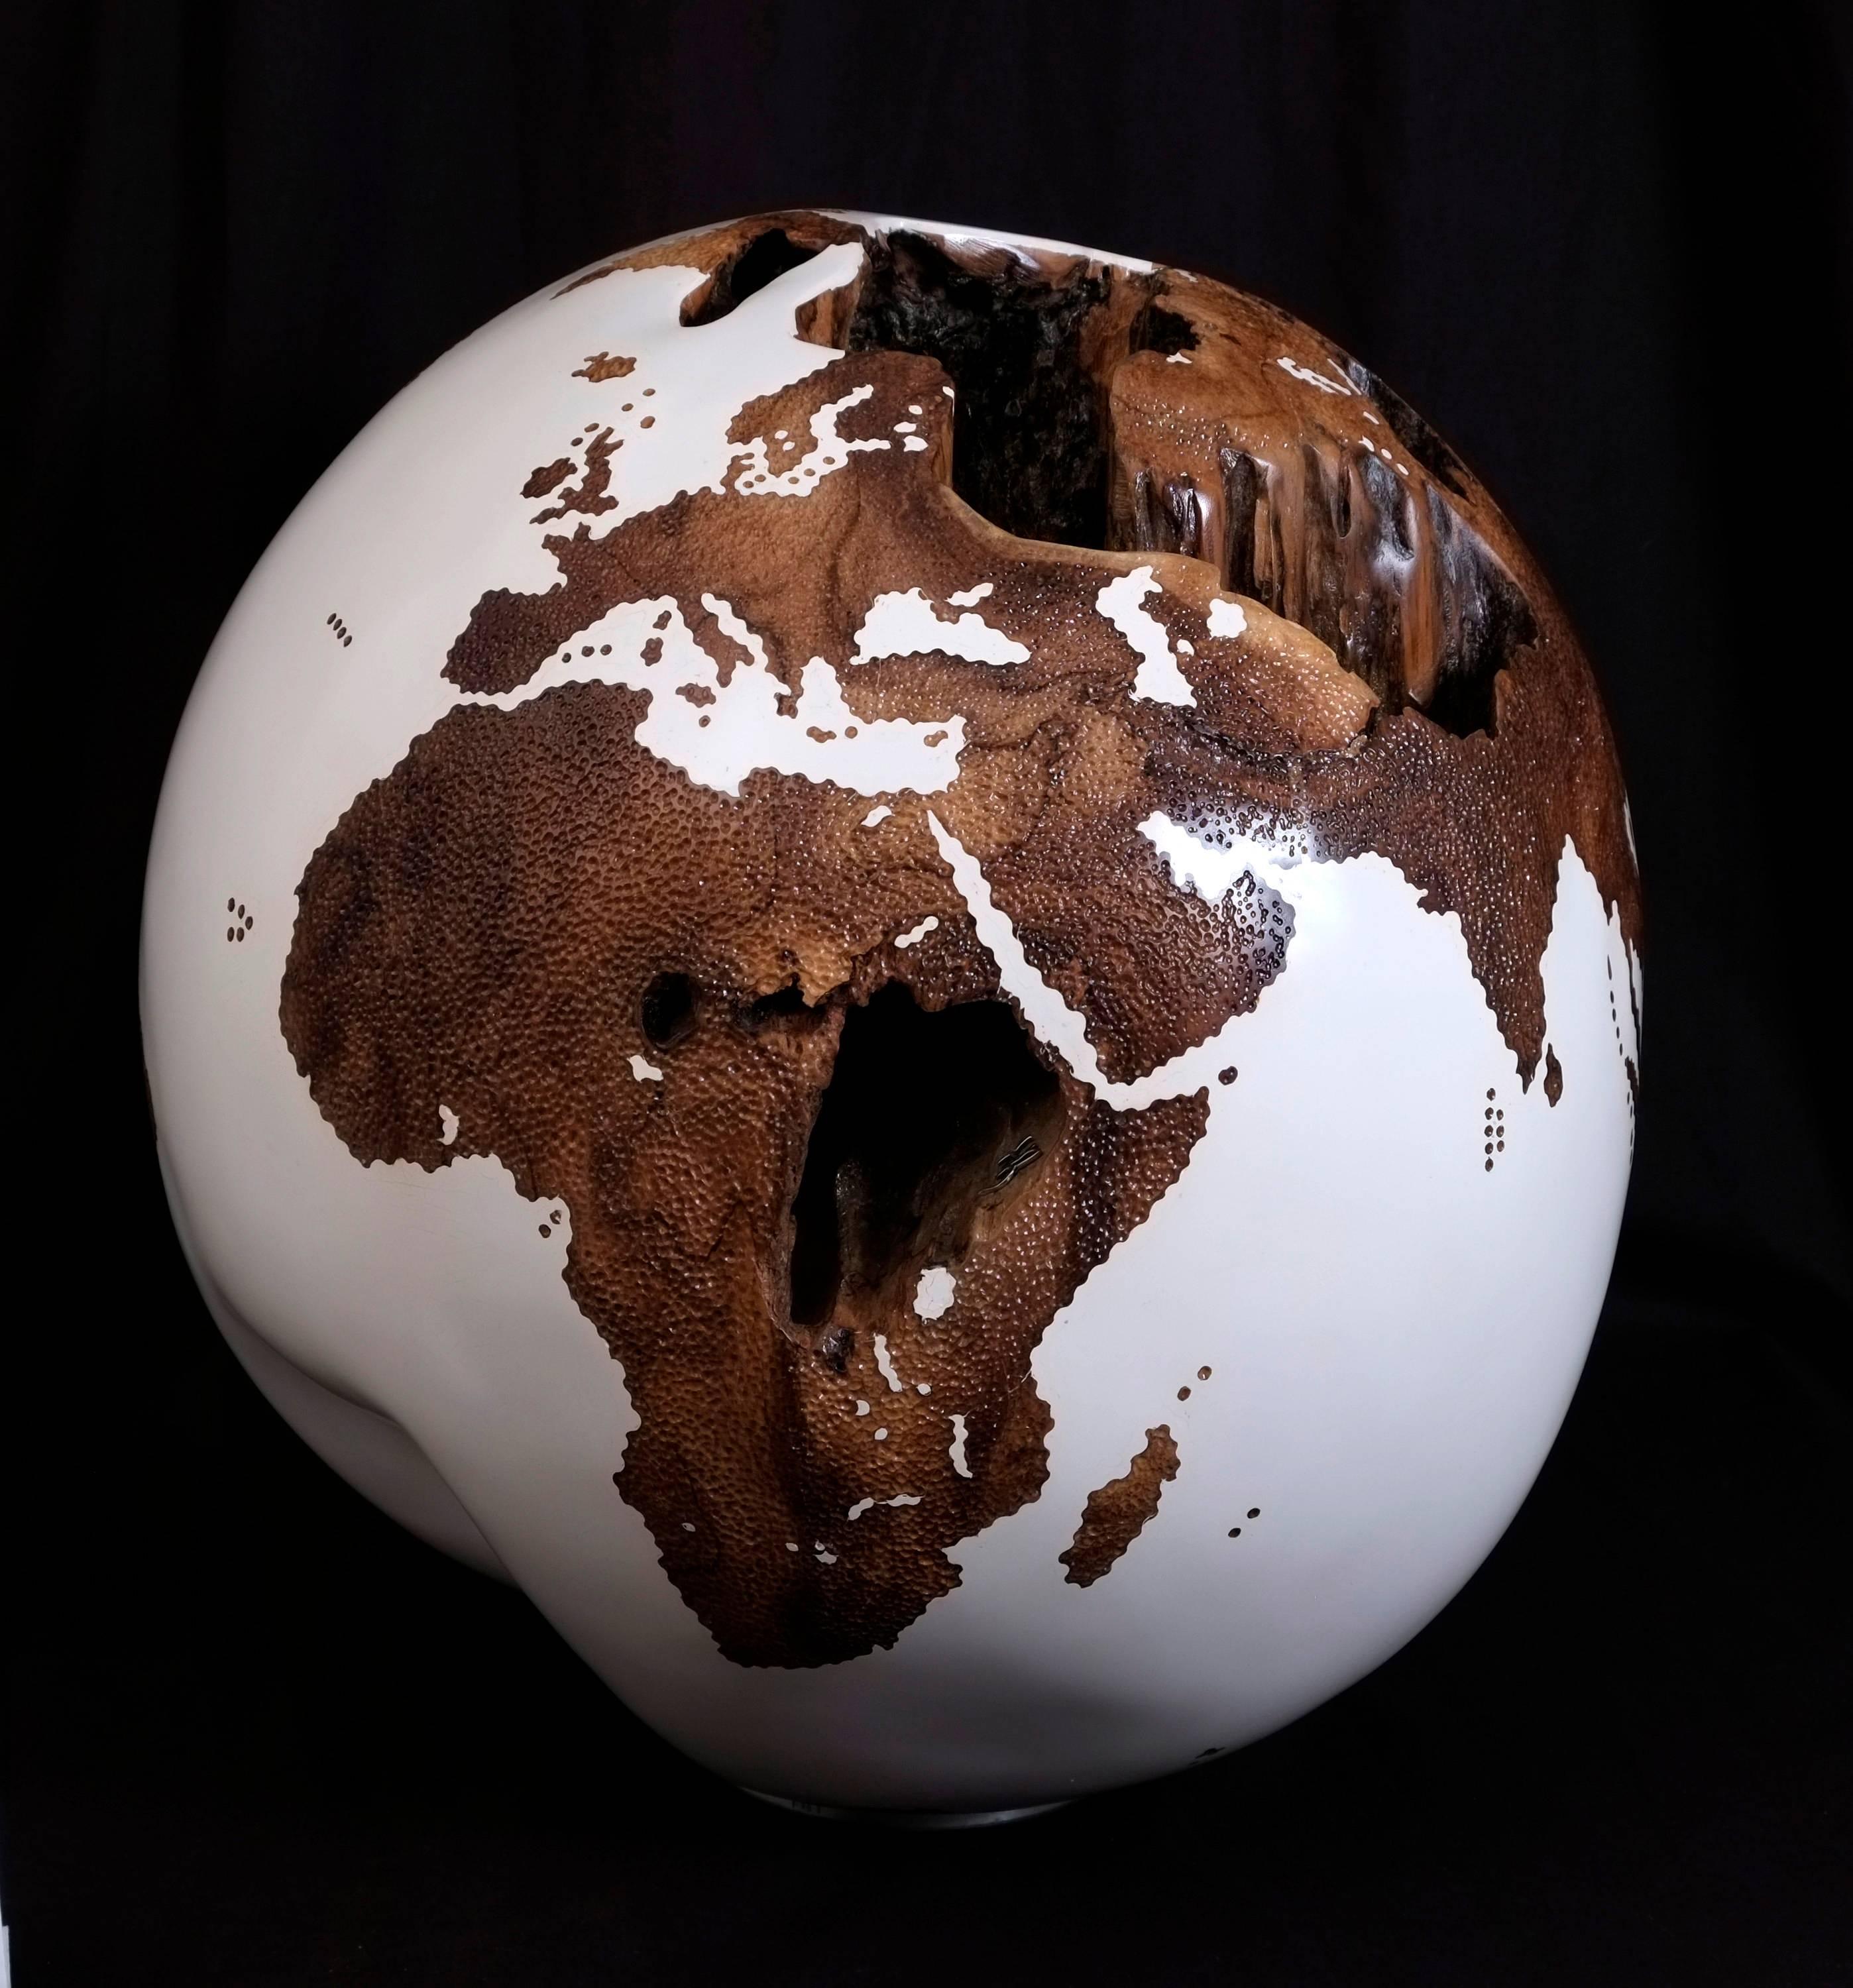 Mystery is the basic element of all works of art.

Stunning hand-carved wooden globe made of reclaimed teak root in acrylic white resin finishing and hammered skin effect, with a striking natural feature that resembles a mysterious volcanic